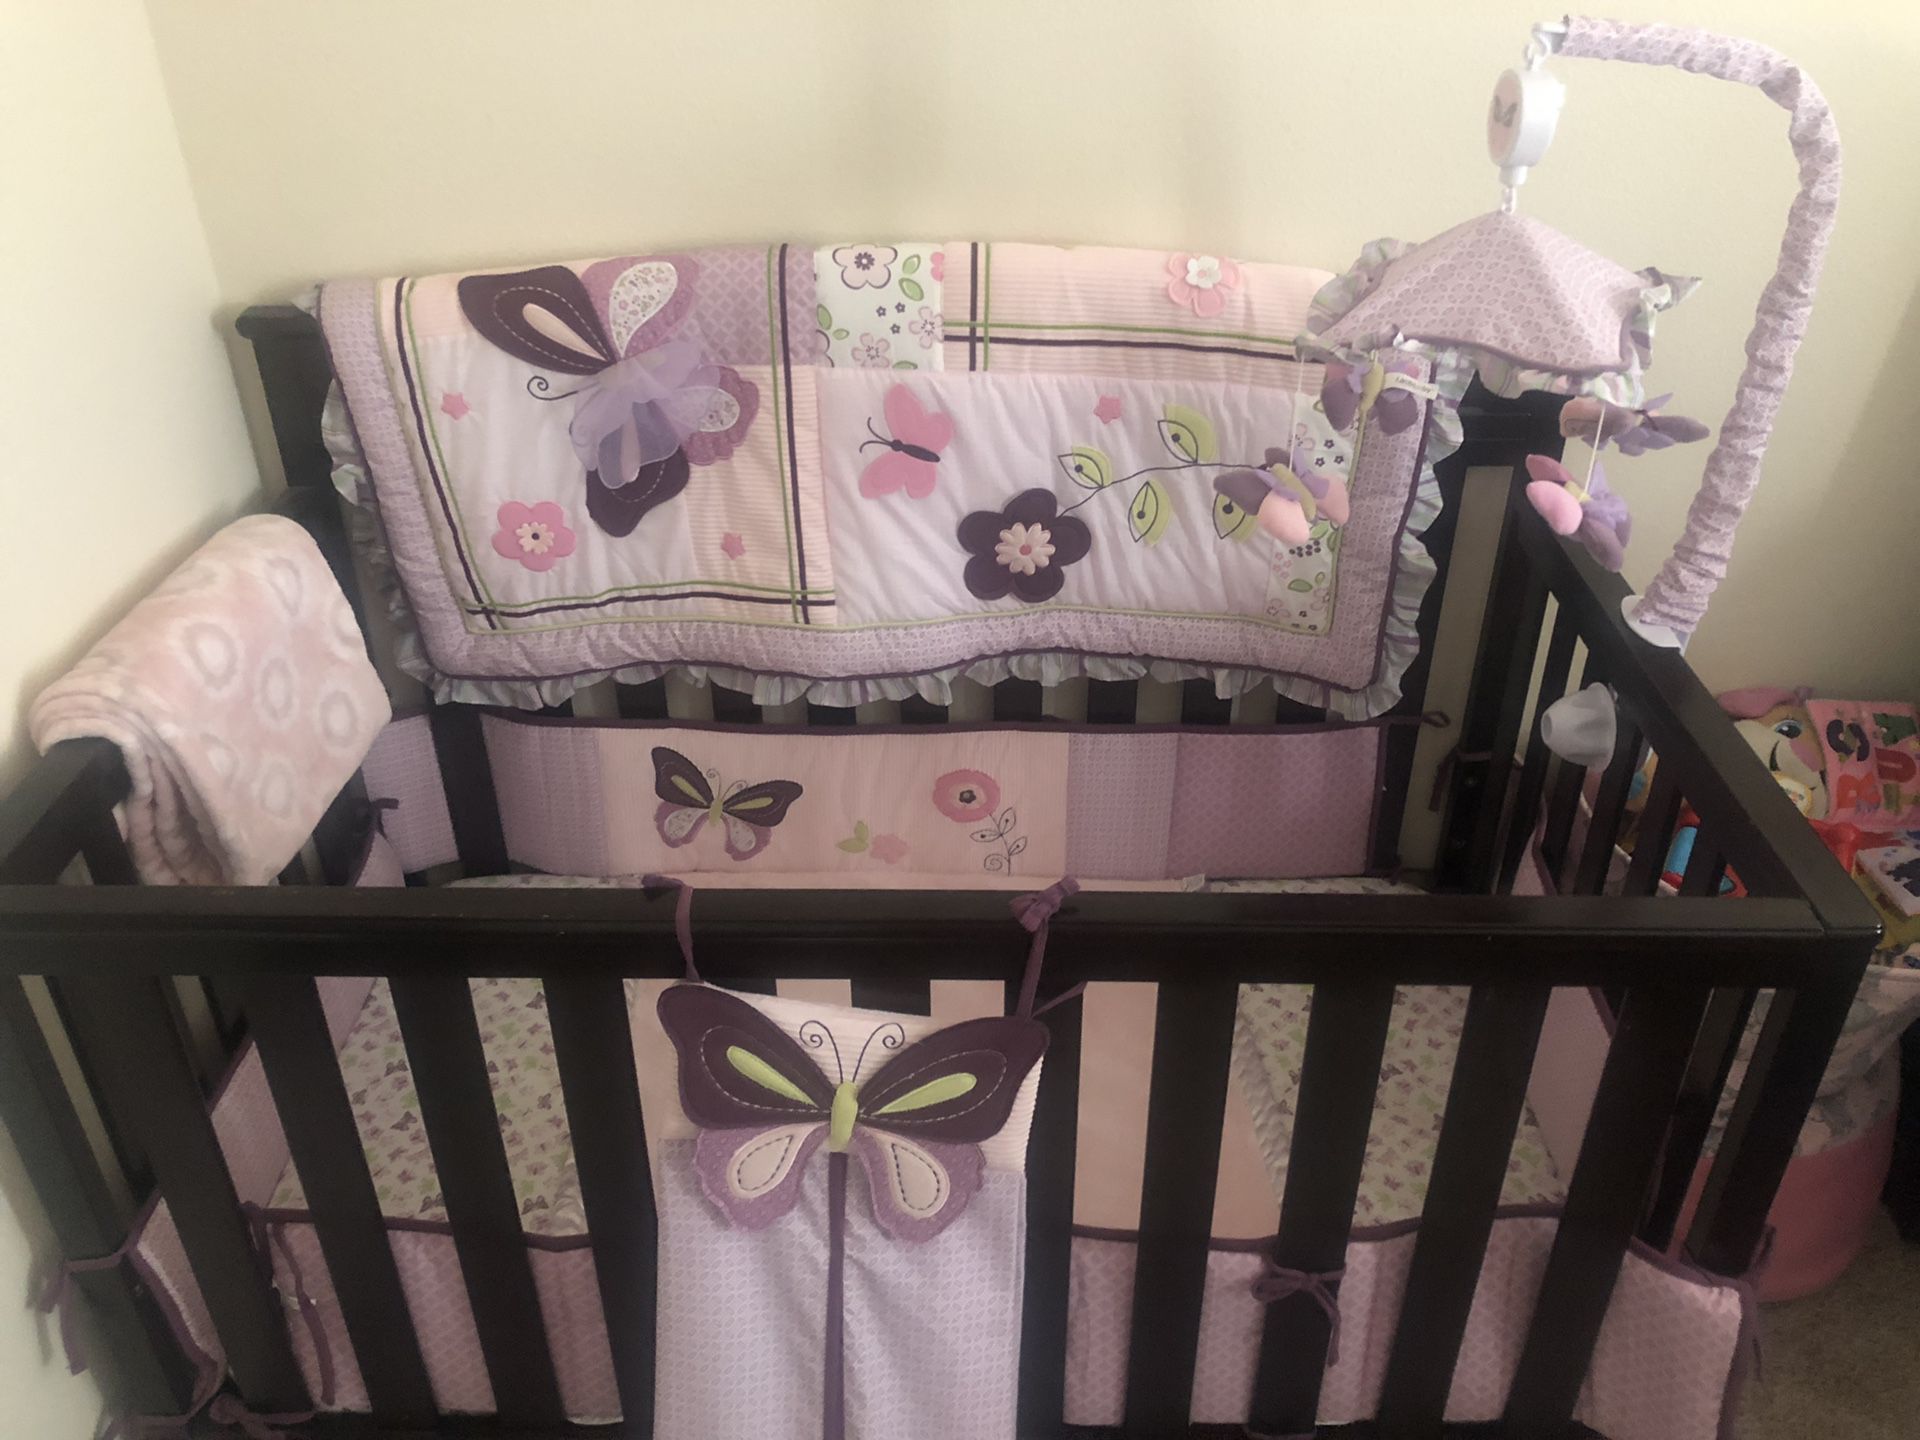 Crib for baby comes with everything